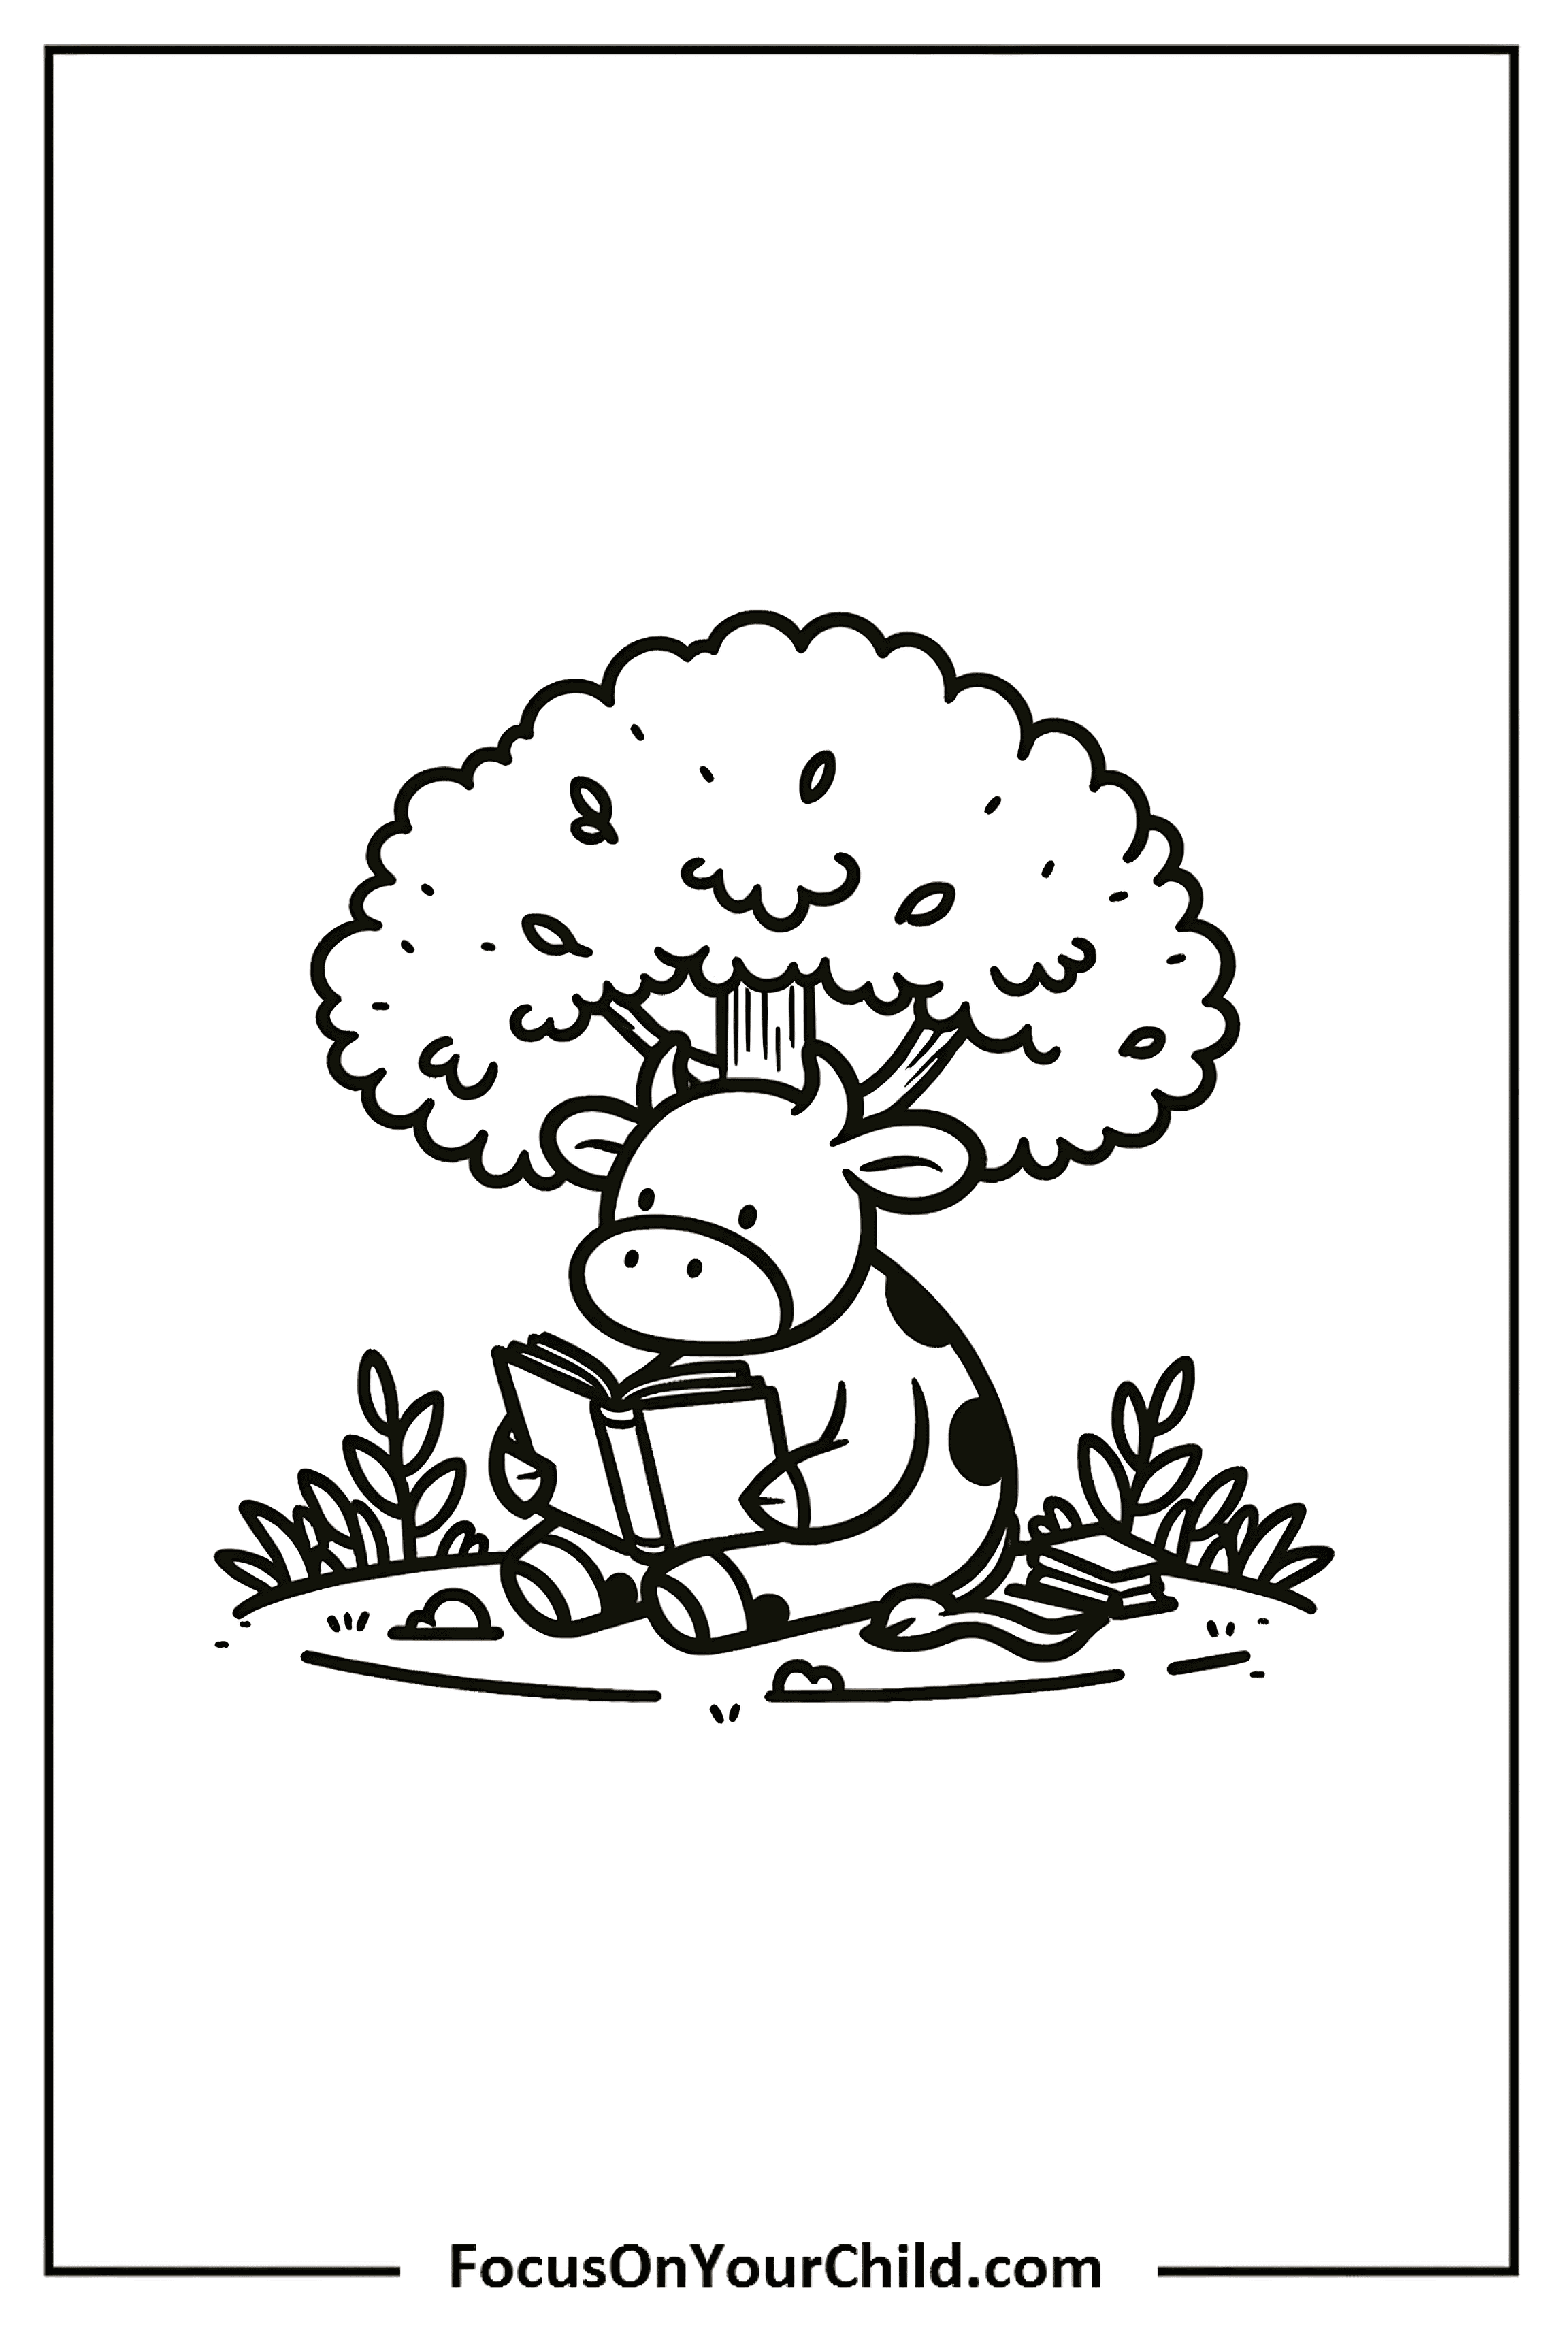 Cow reading book under tree in charming black-and-white illustration.